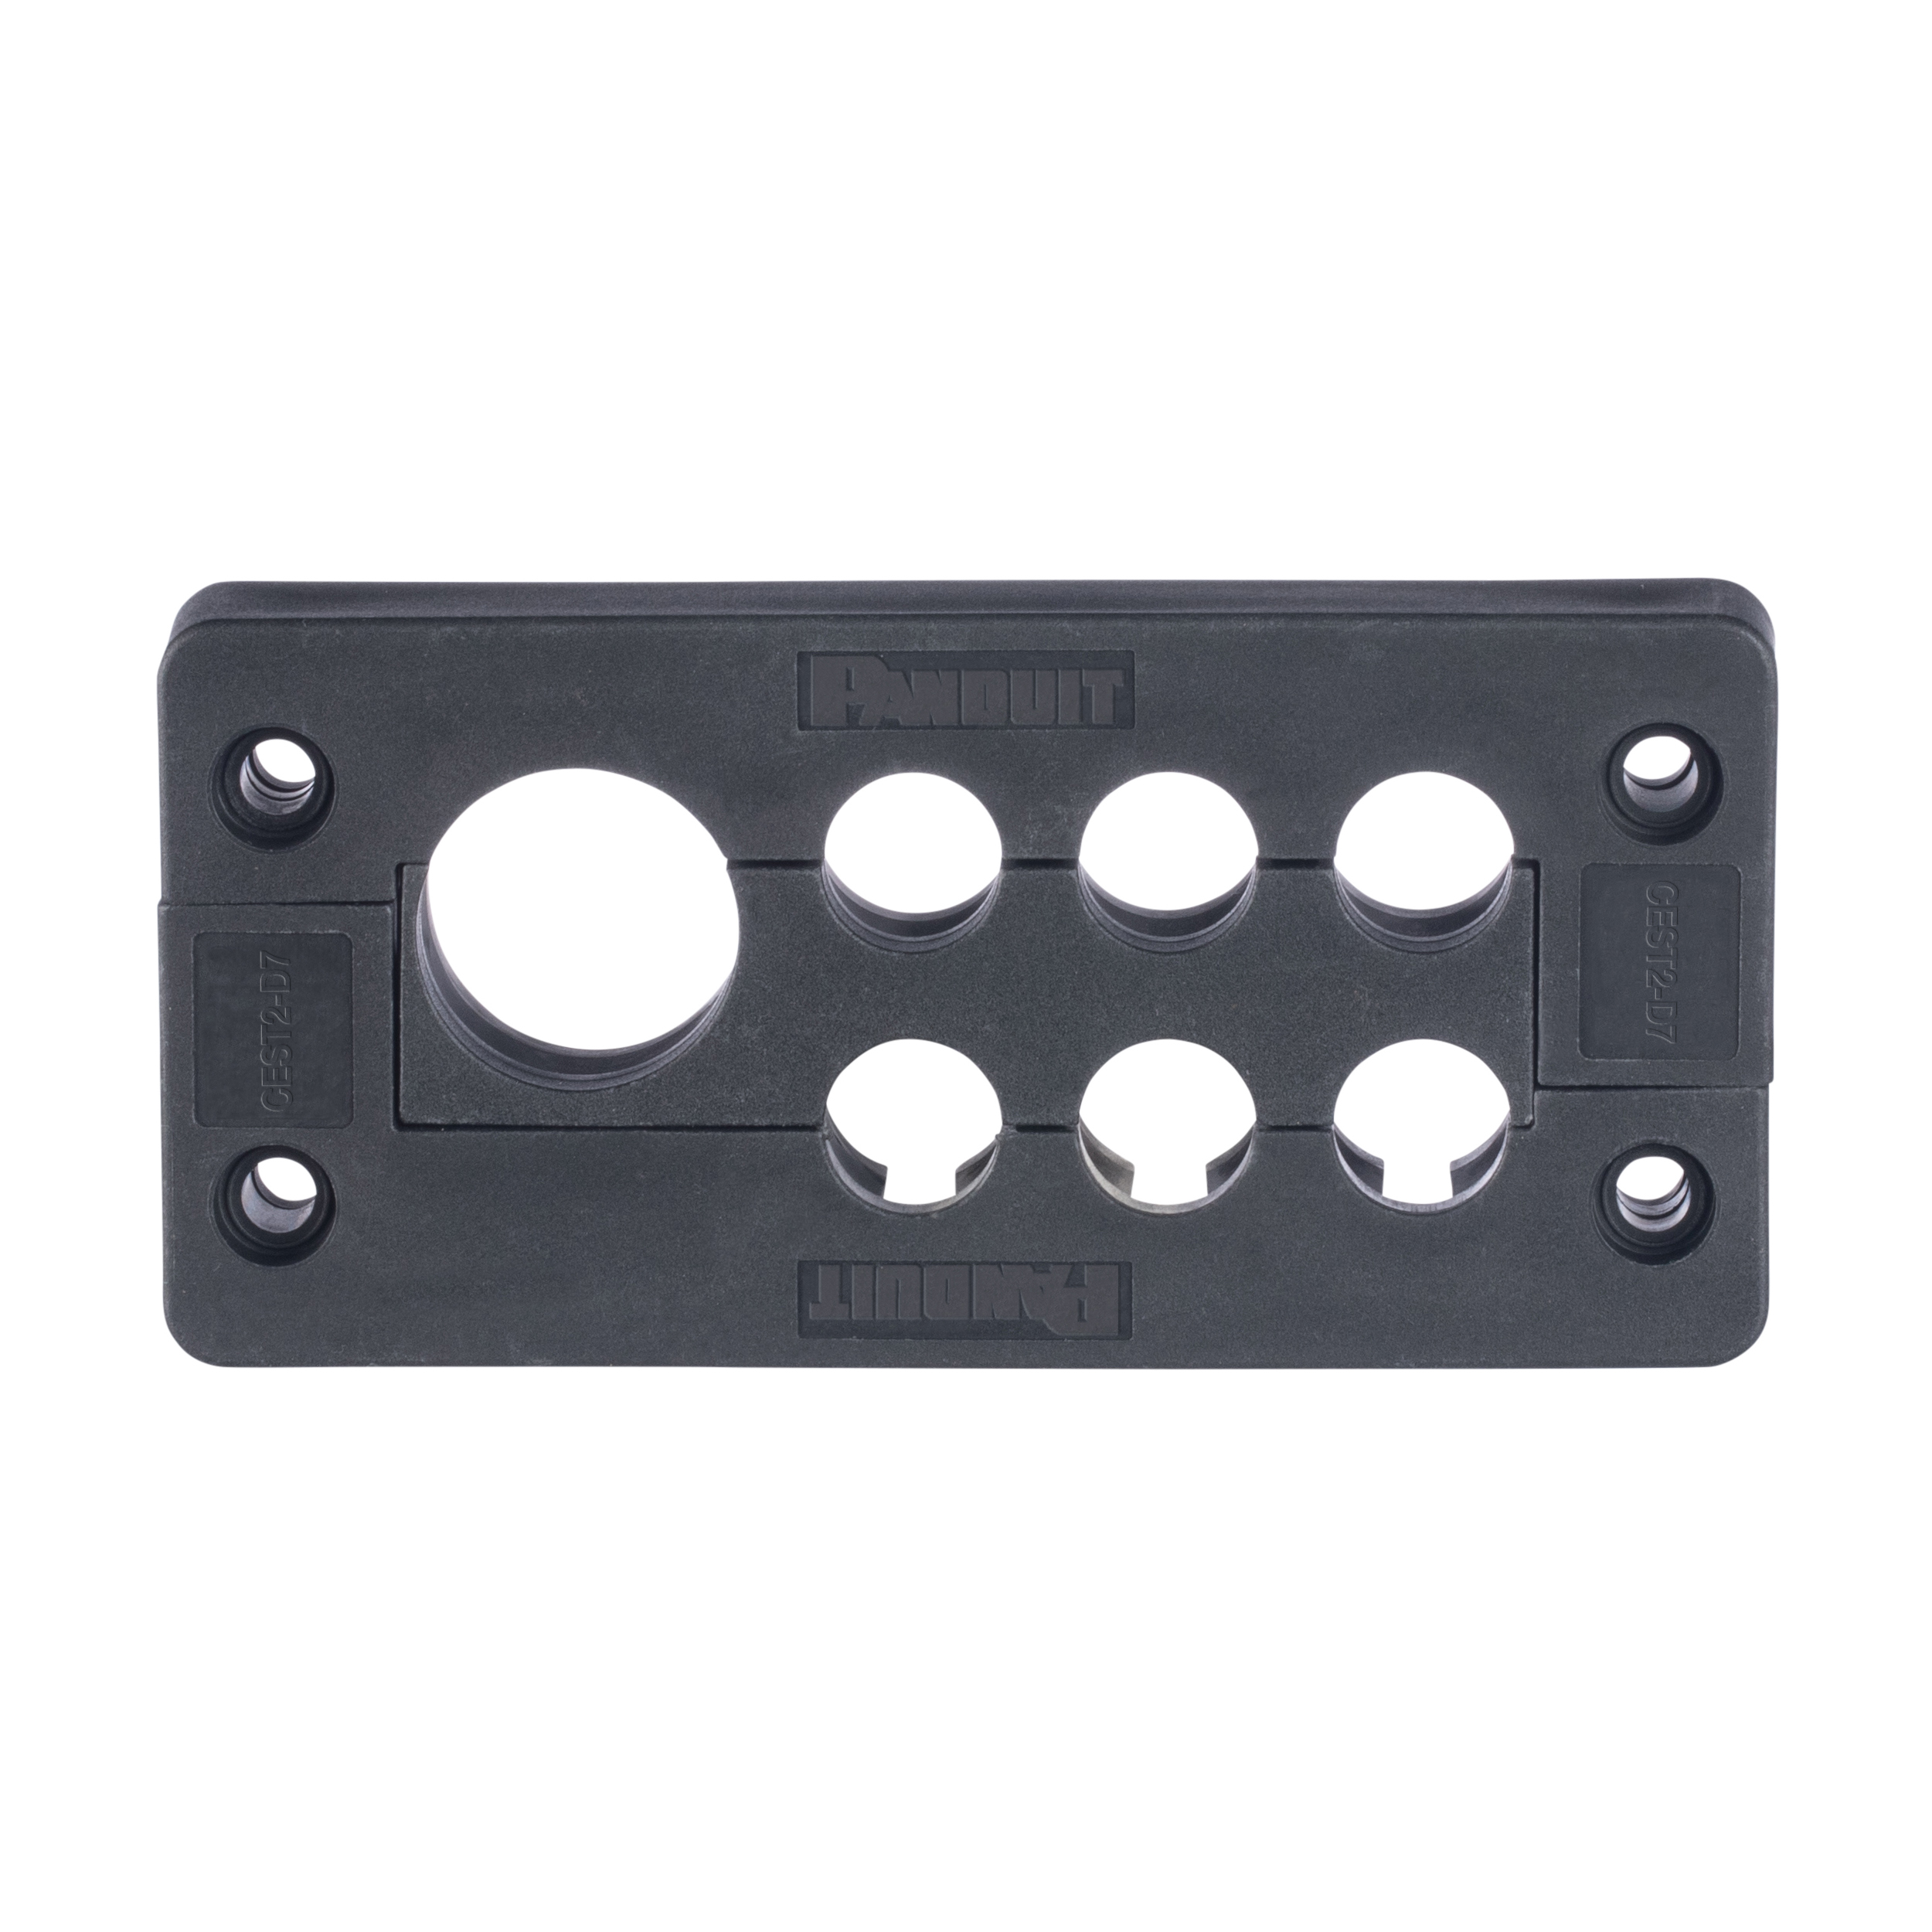 Cable Entry System, Terminated, IP65, 3.39" x 1.42", 7 Holes, 1 PC